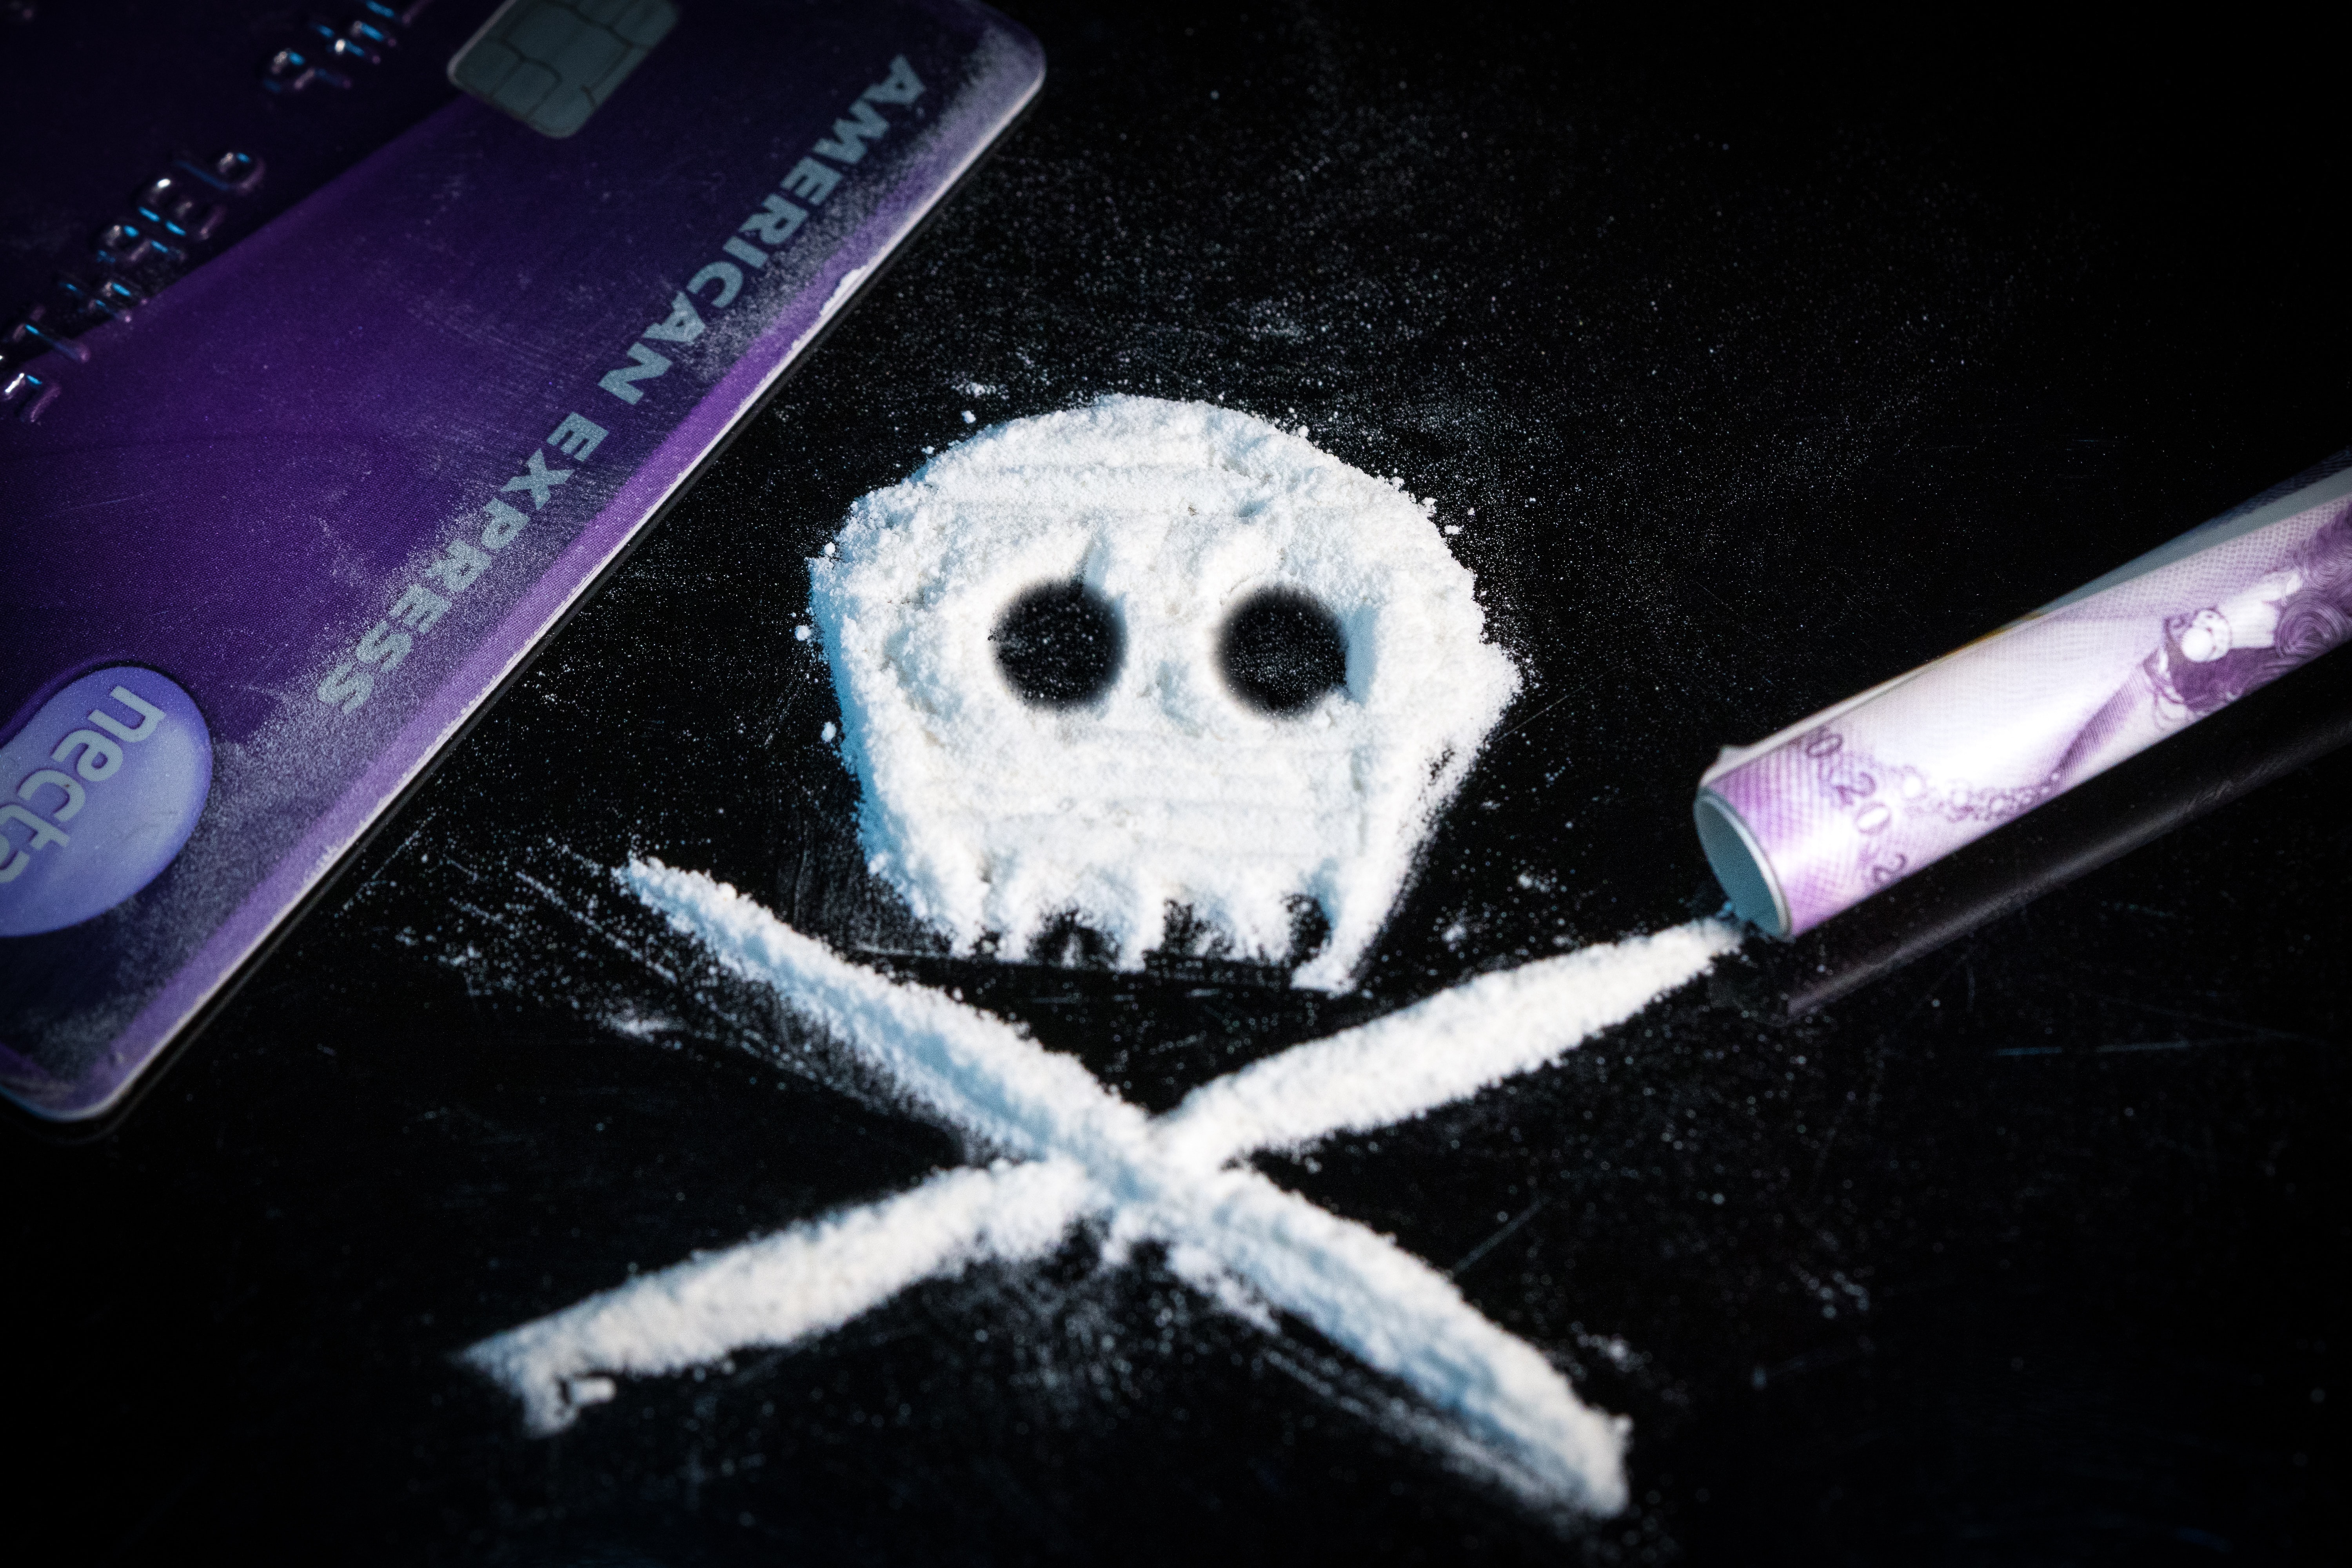 A skull and crossbones made out of cocaine powder on top of a mirror